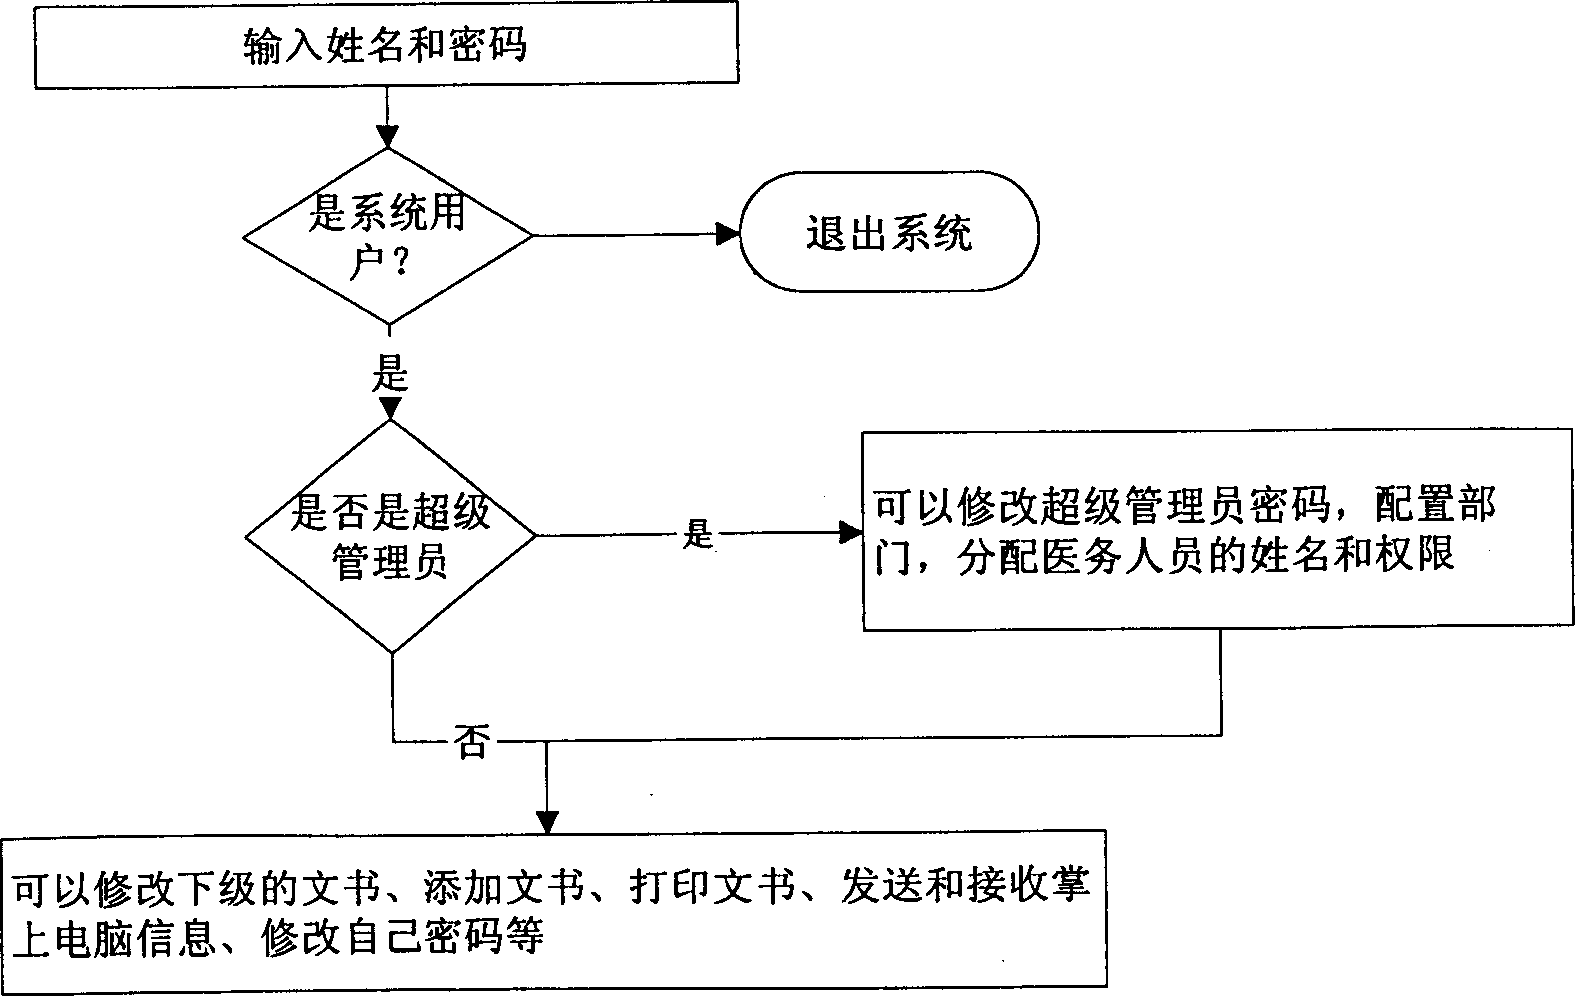 Method for inquiring and managing electronic disease history by palm computer